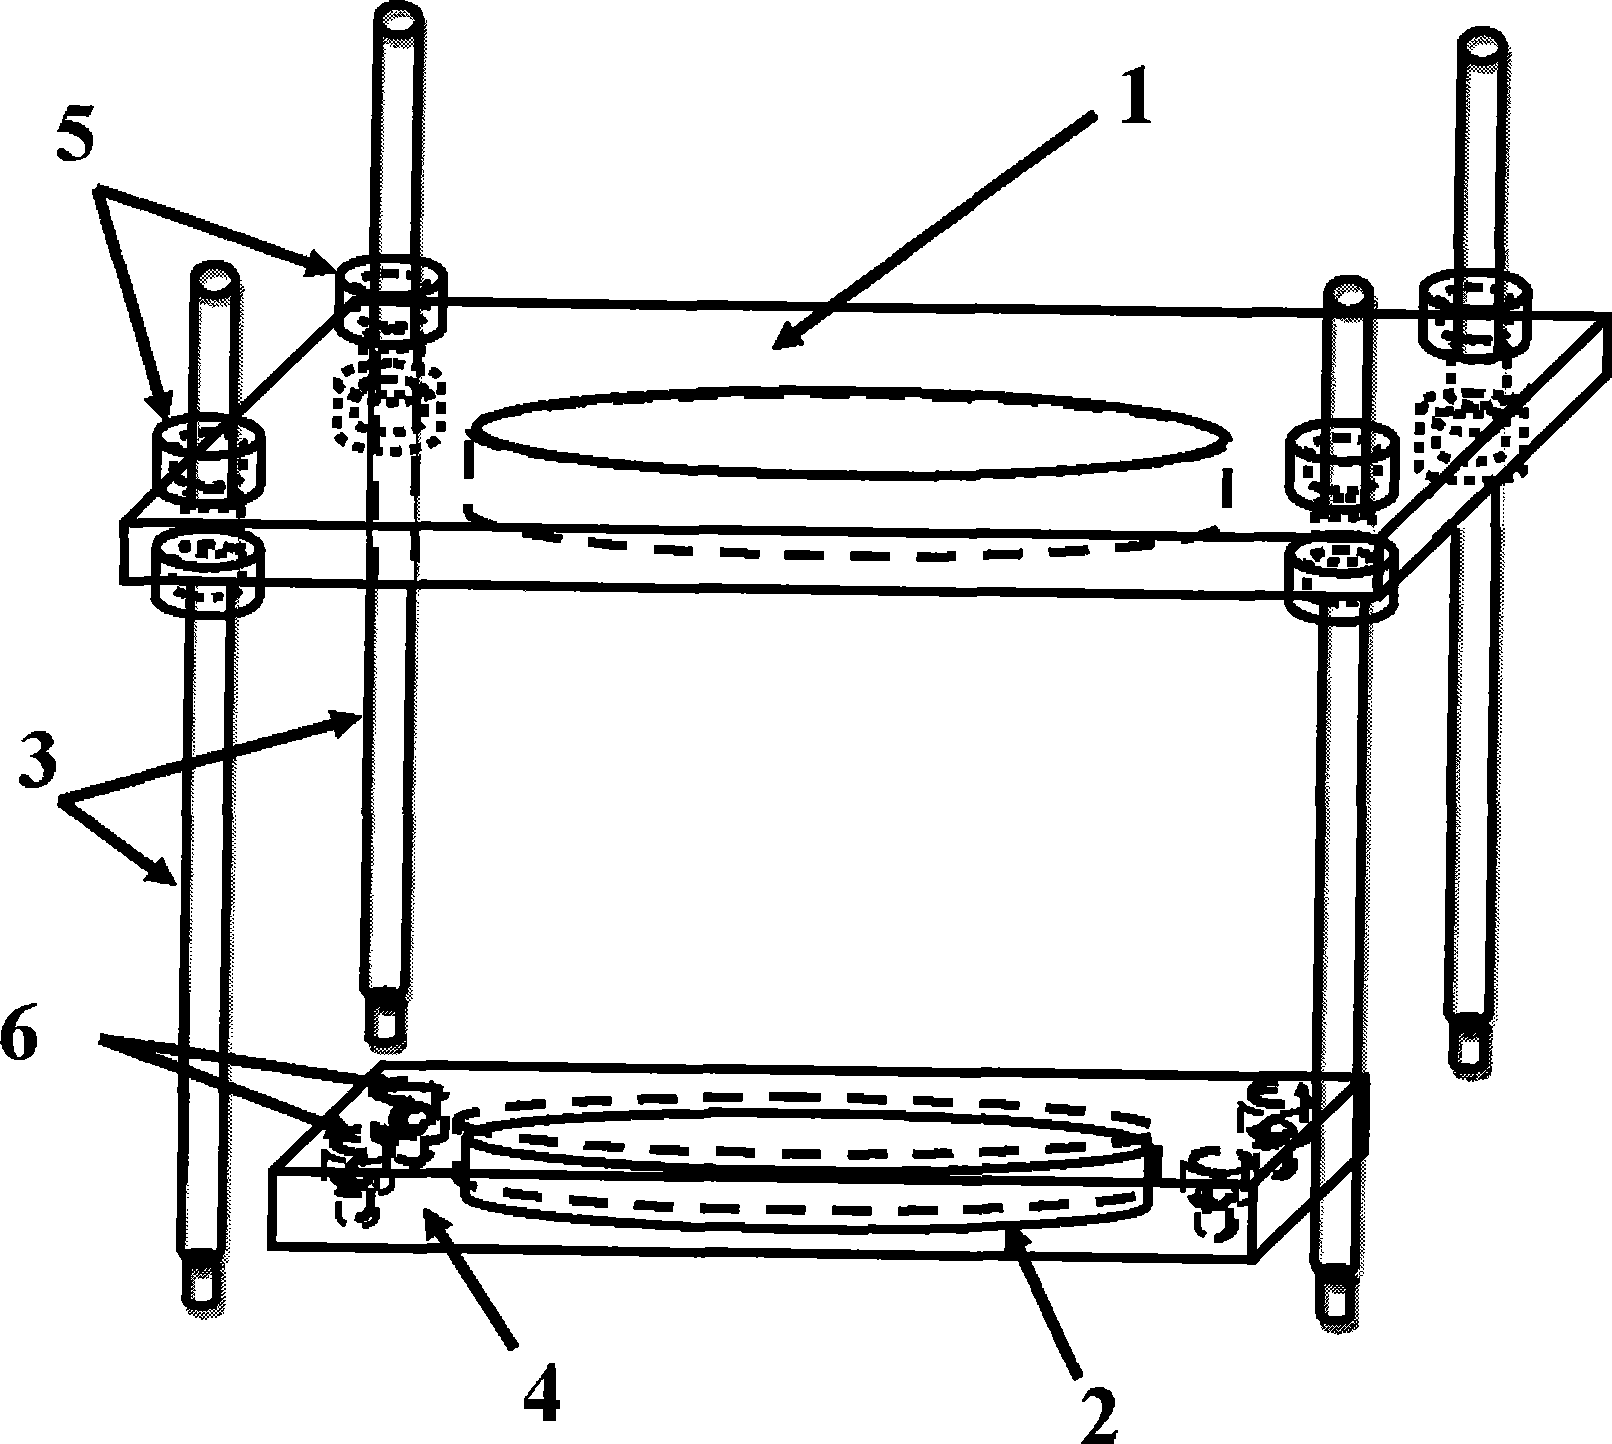 Vertical variable magnetic field device